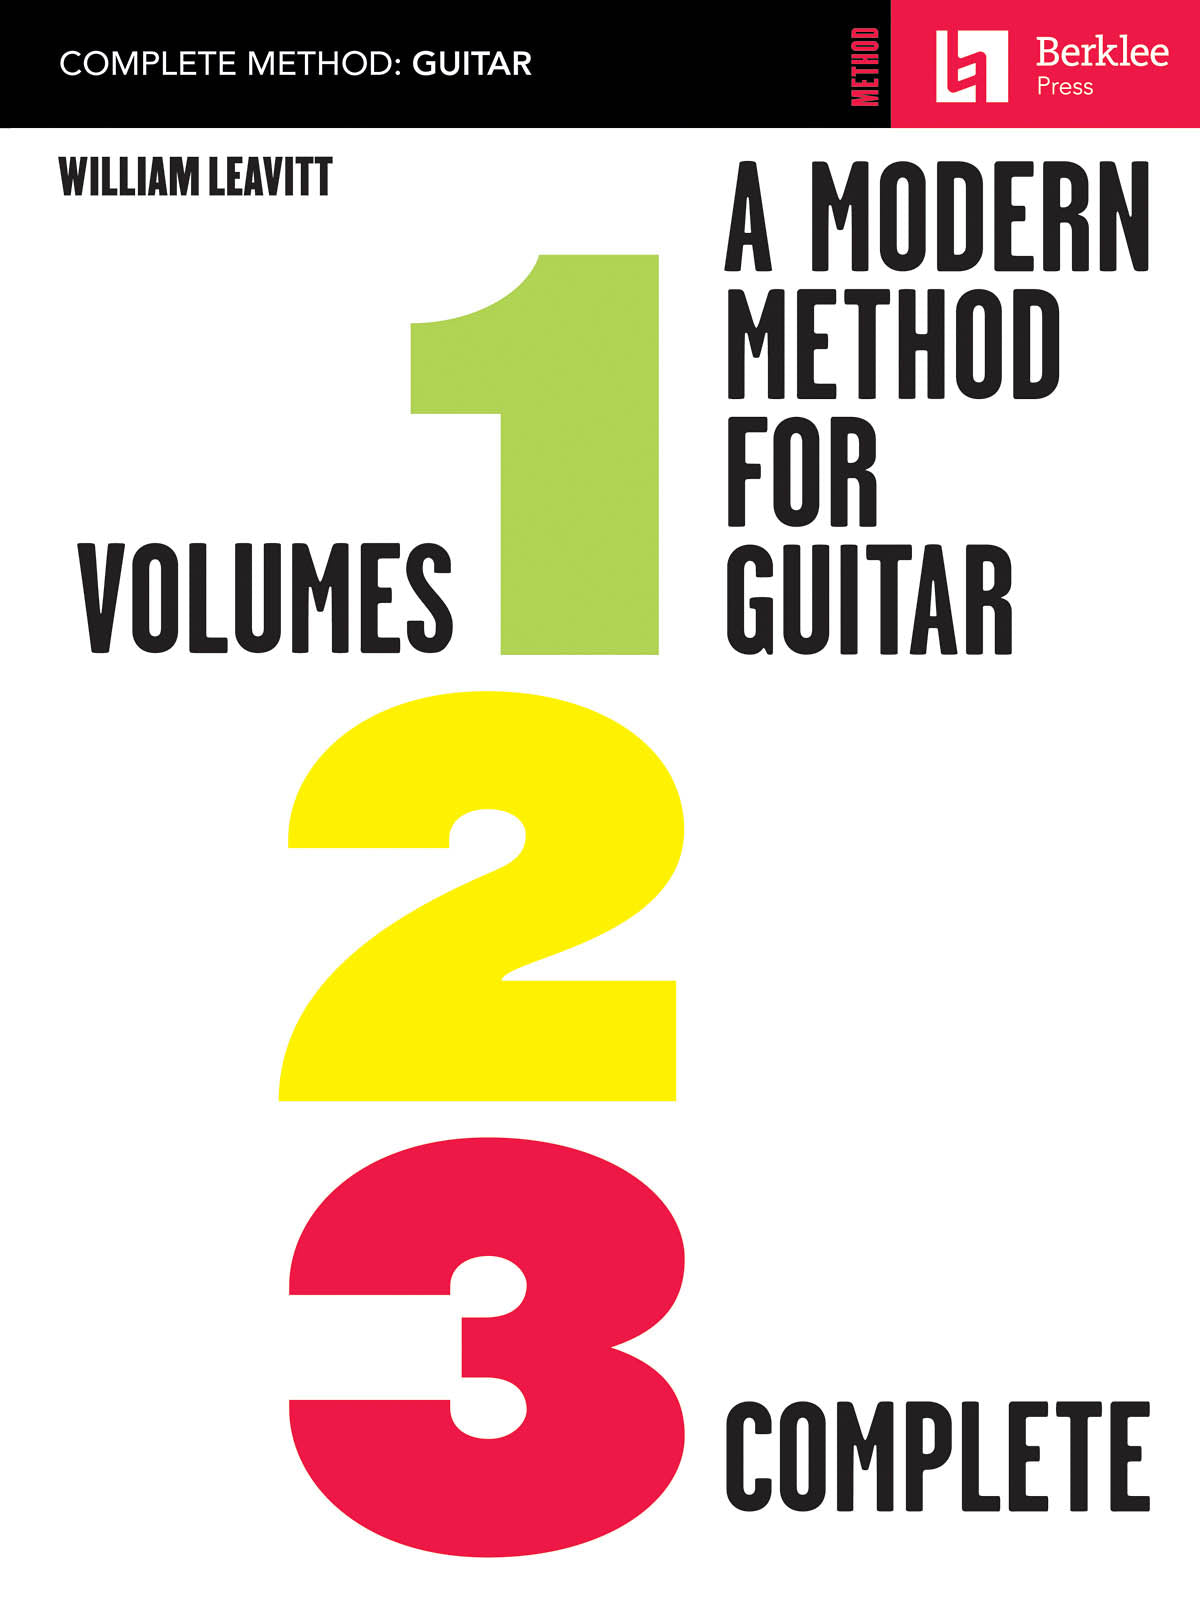 Cover of A Modern Method for Guitar - Volumes 1, 2, 3 Complete